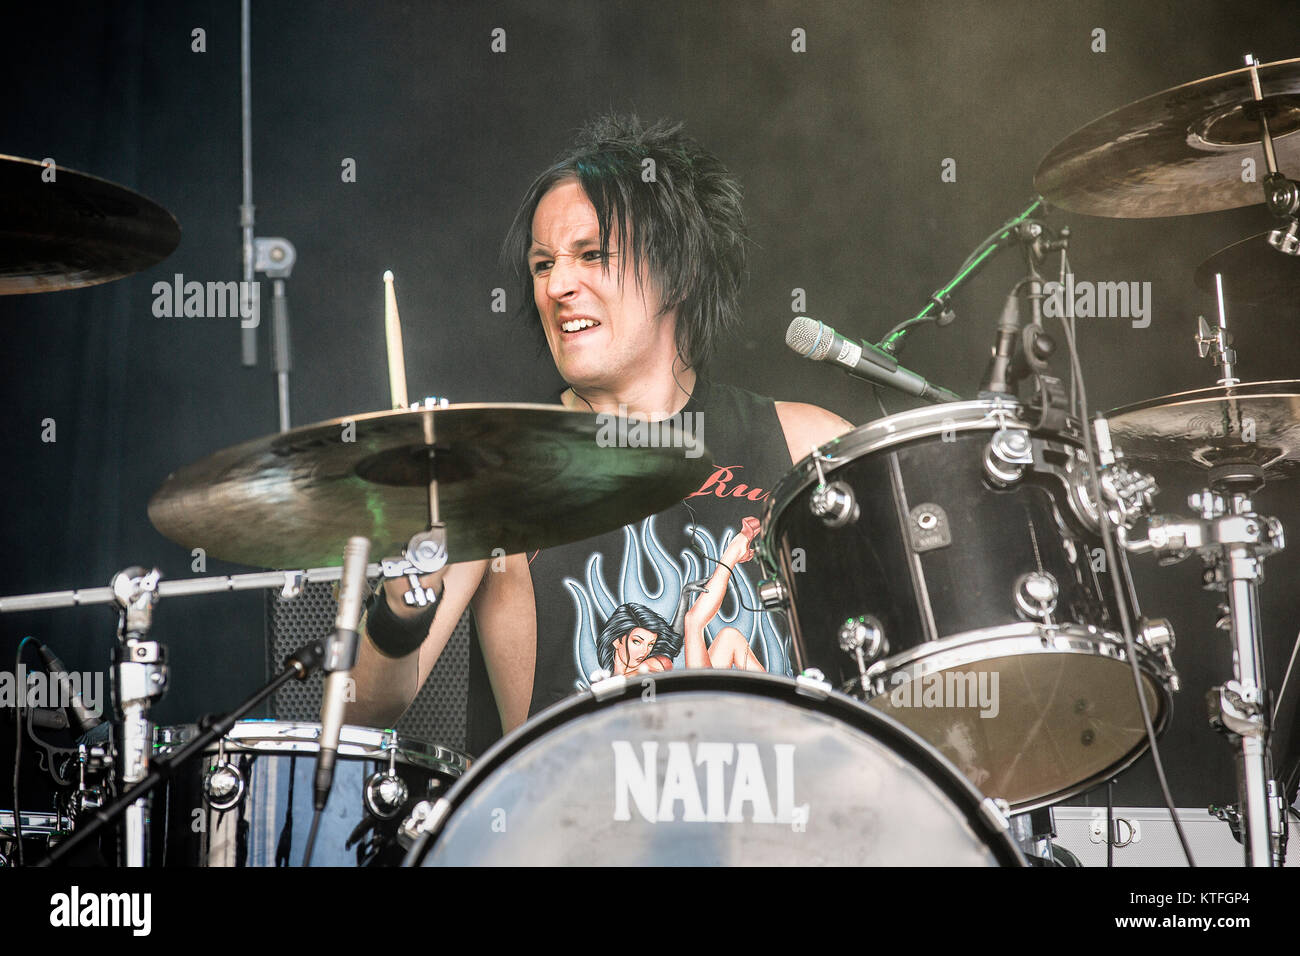 The Norwegian rock band NiteRain performs a live concert at the Sweden Rock Festival 2016. Here drummer Morten Garberg is seen live on stage. Sweden, 11/06 2016. Stock Photo